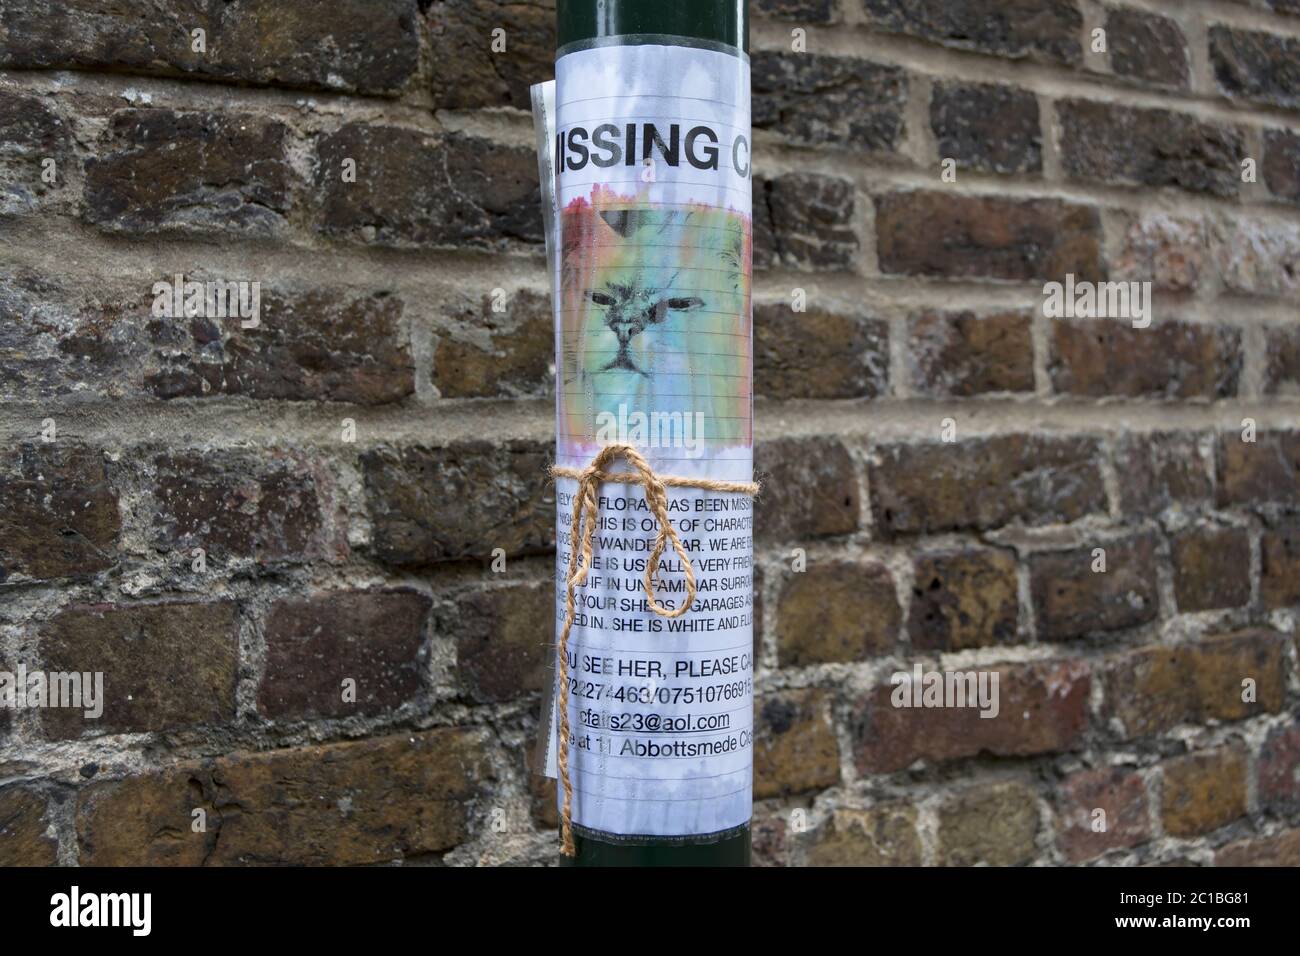 homemade poster for a missing cat, held with string and wrapped around a lamppost, in twickenham, middlesex, england Stock Photo